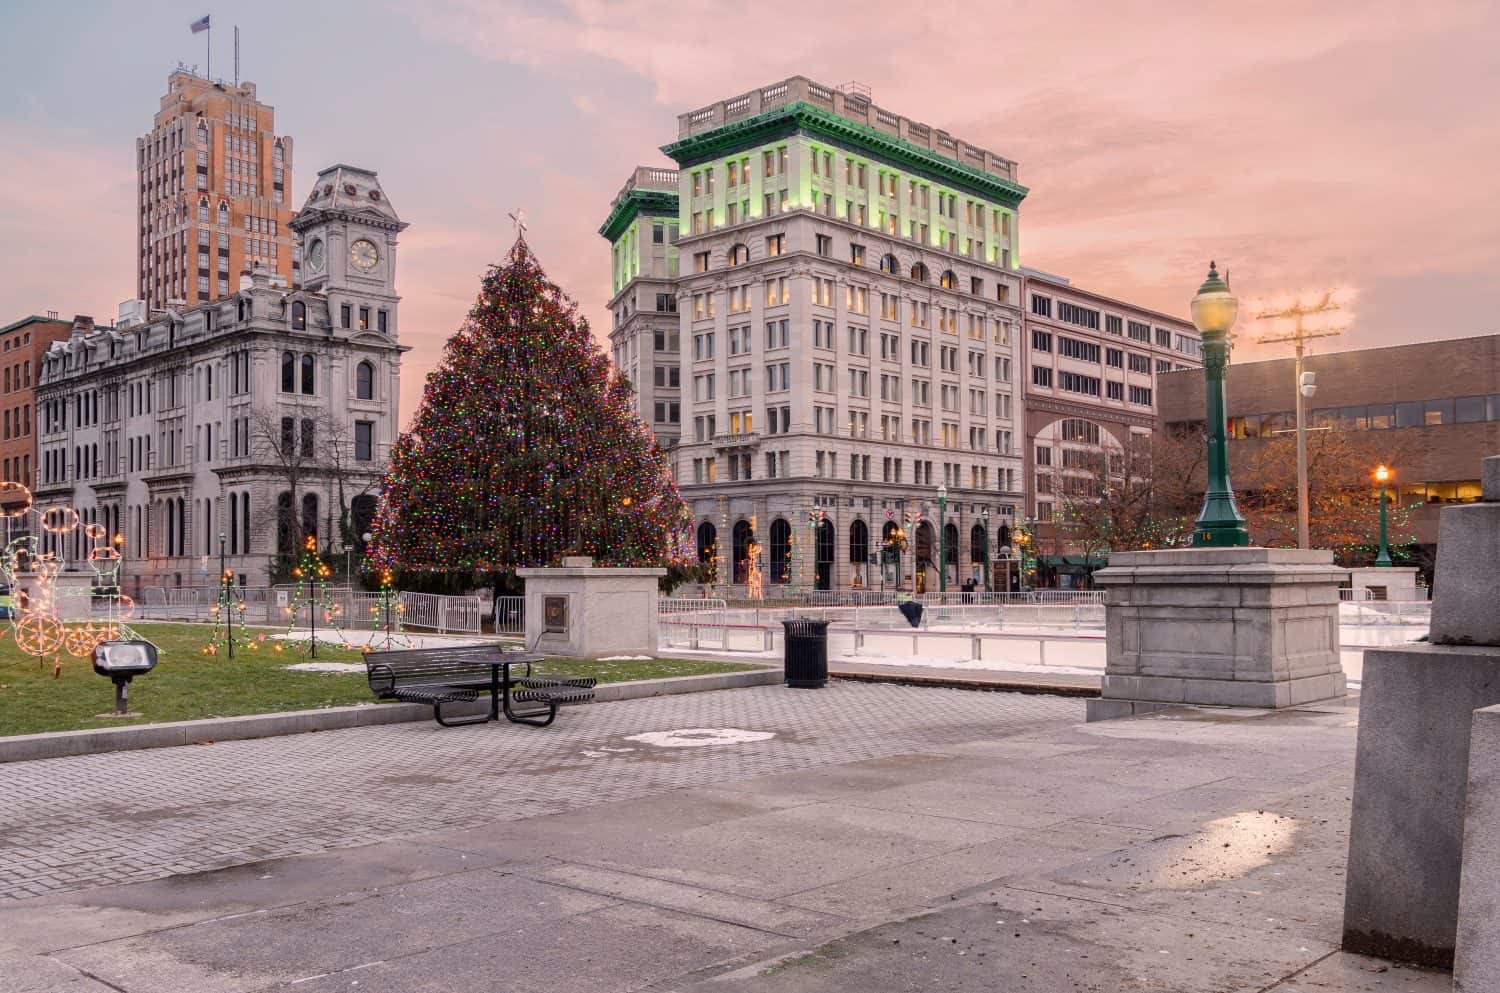 A view of Christmas Tree in Foreground in Clinton Square, Downtown Syracuse, New York